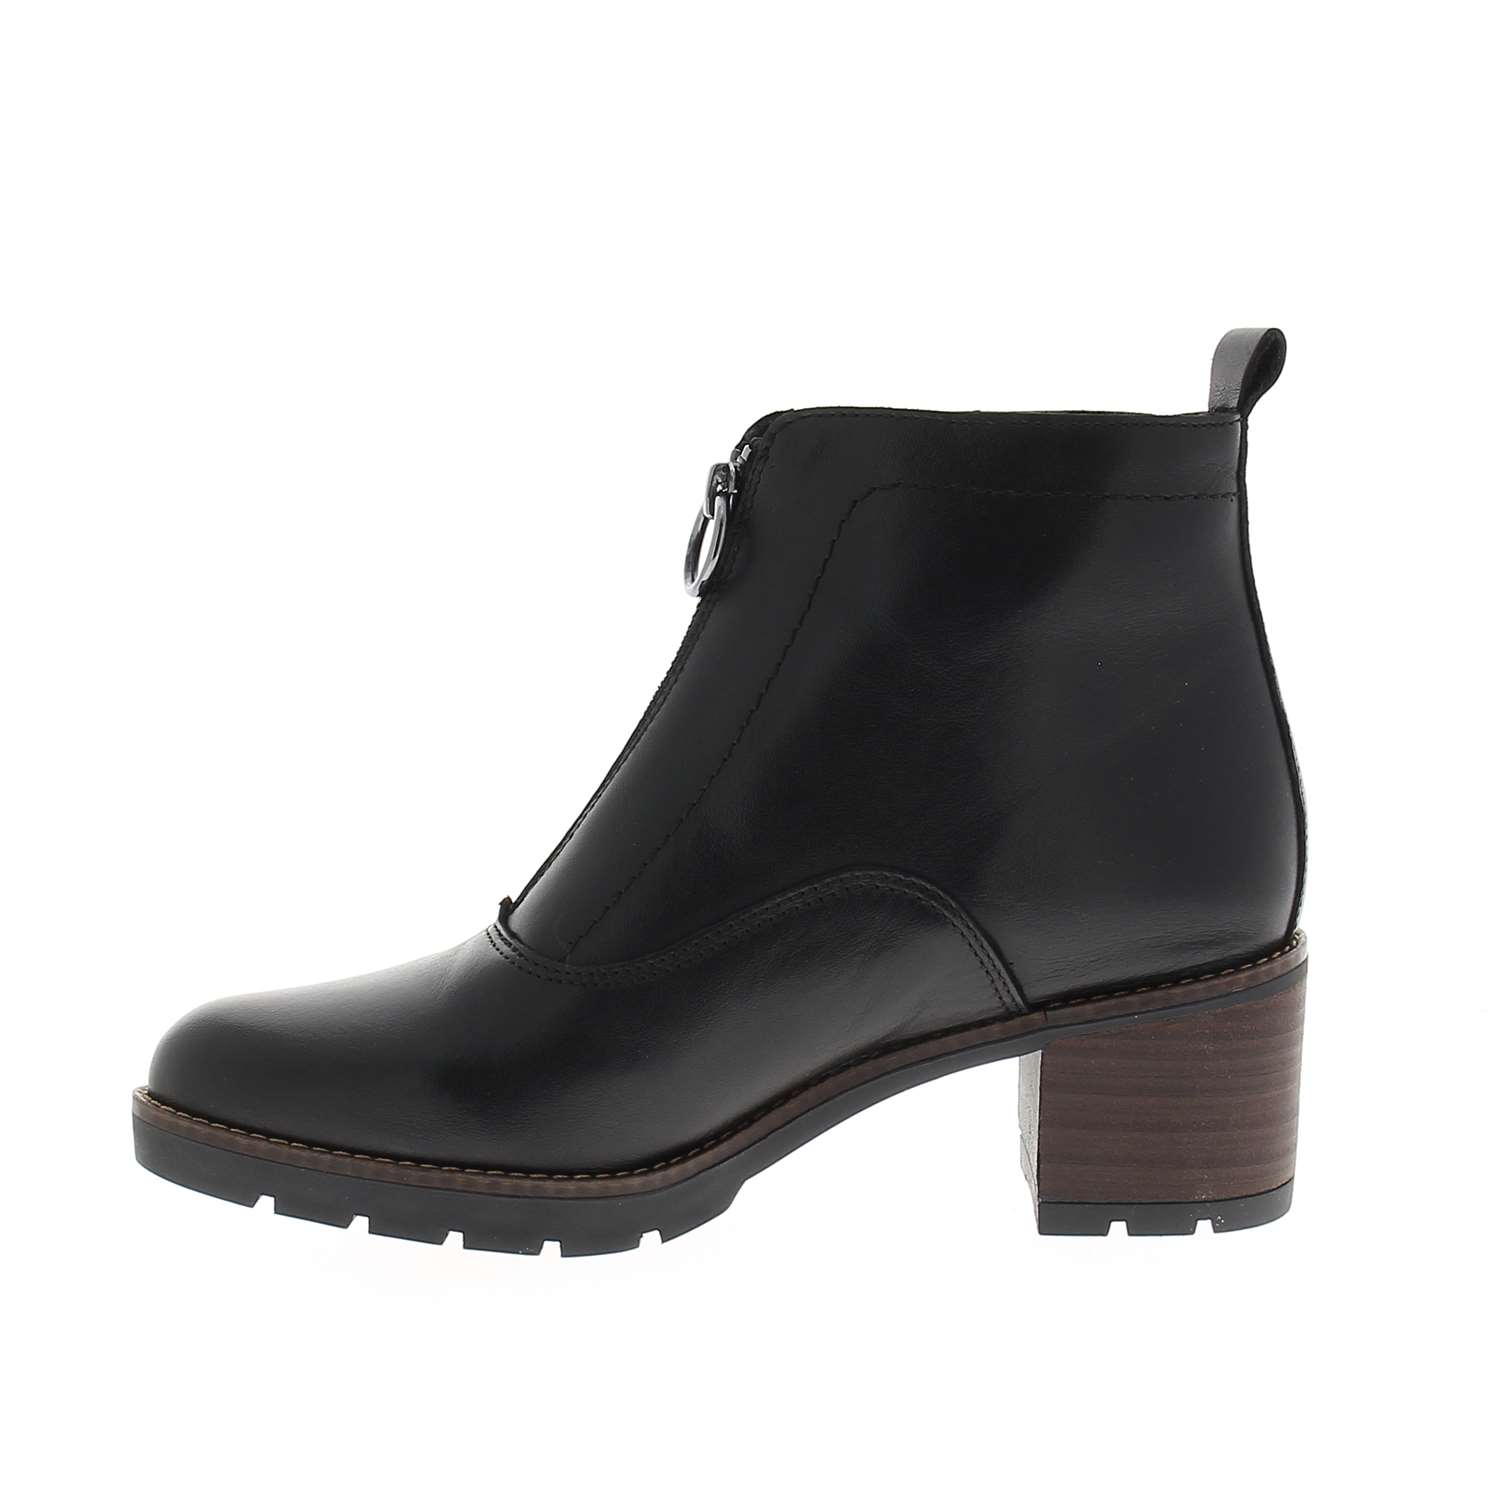 05 - KOALY -  - Boots et bottines - Cuir